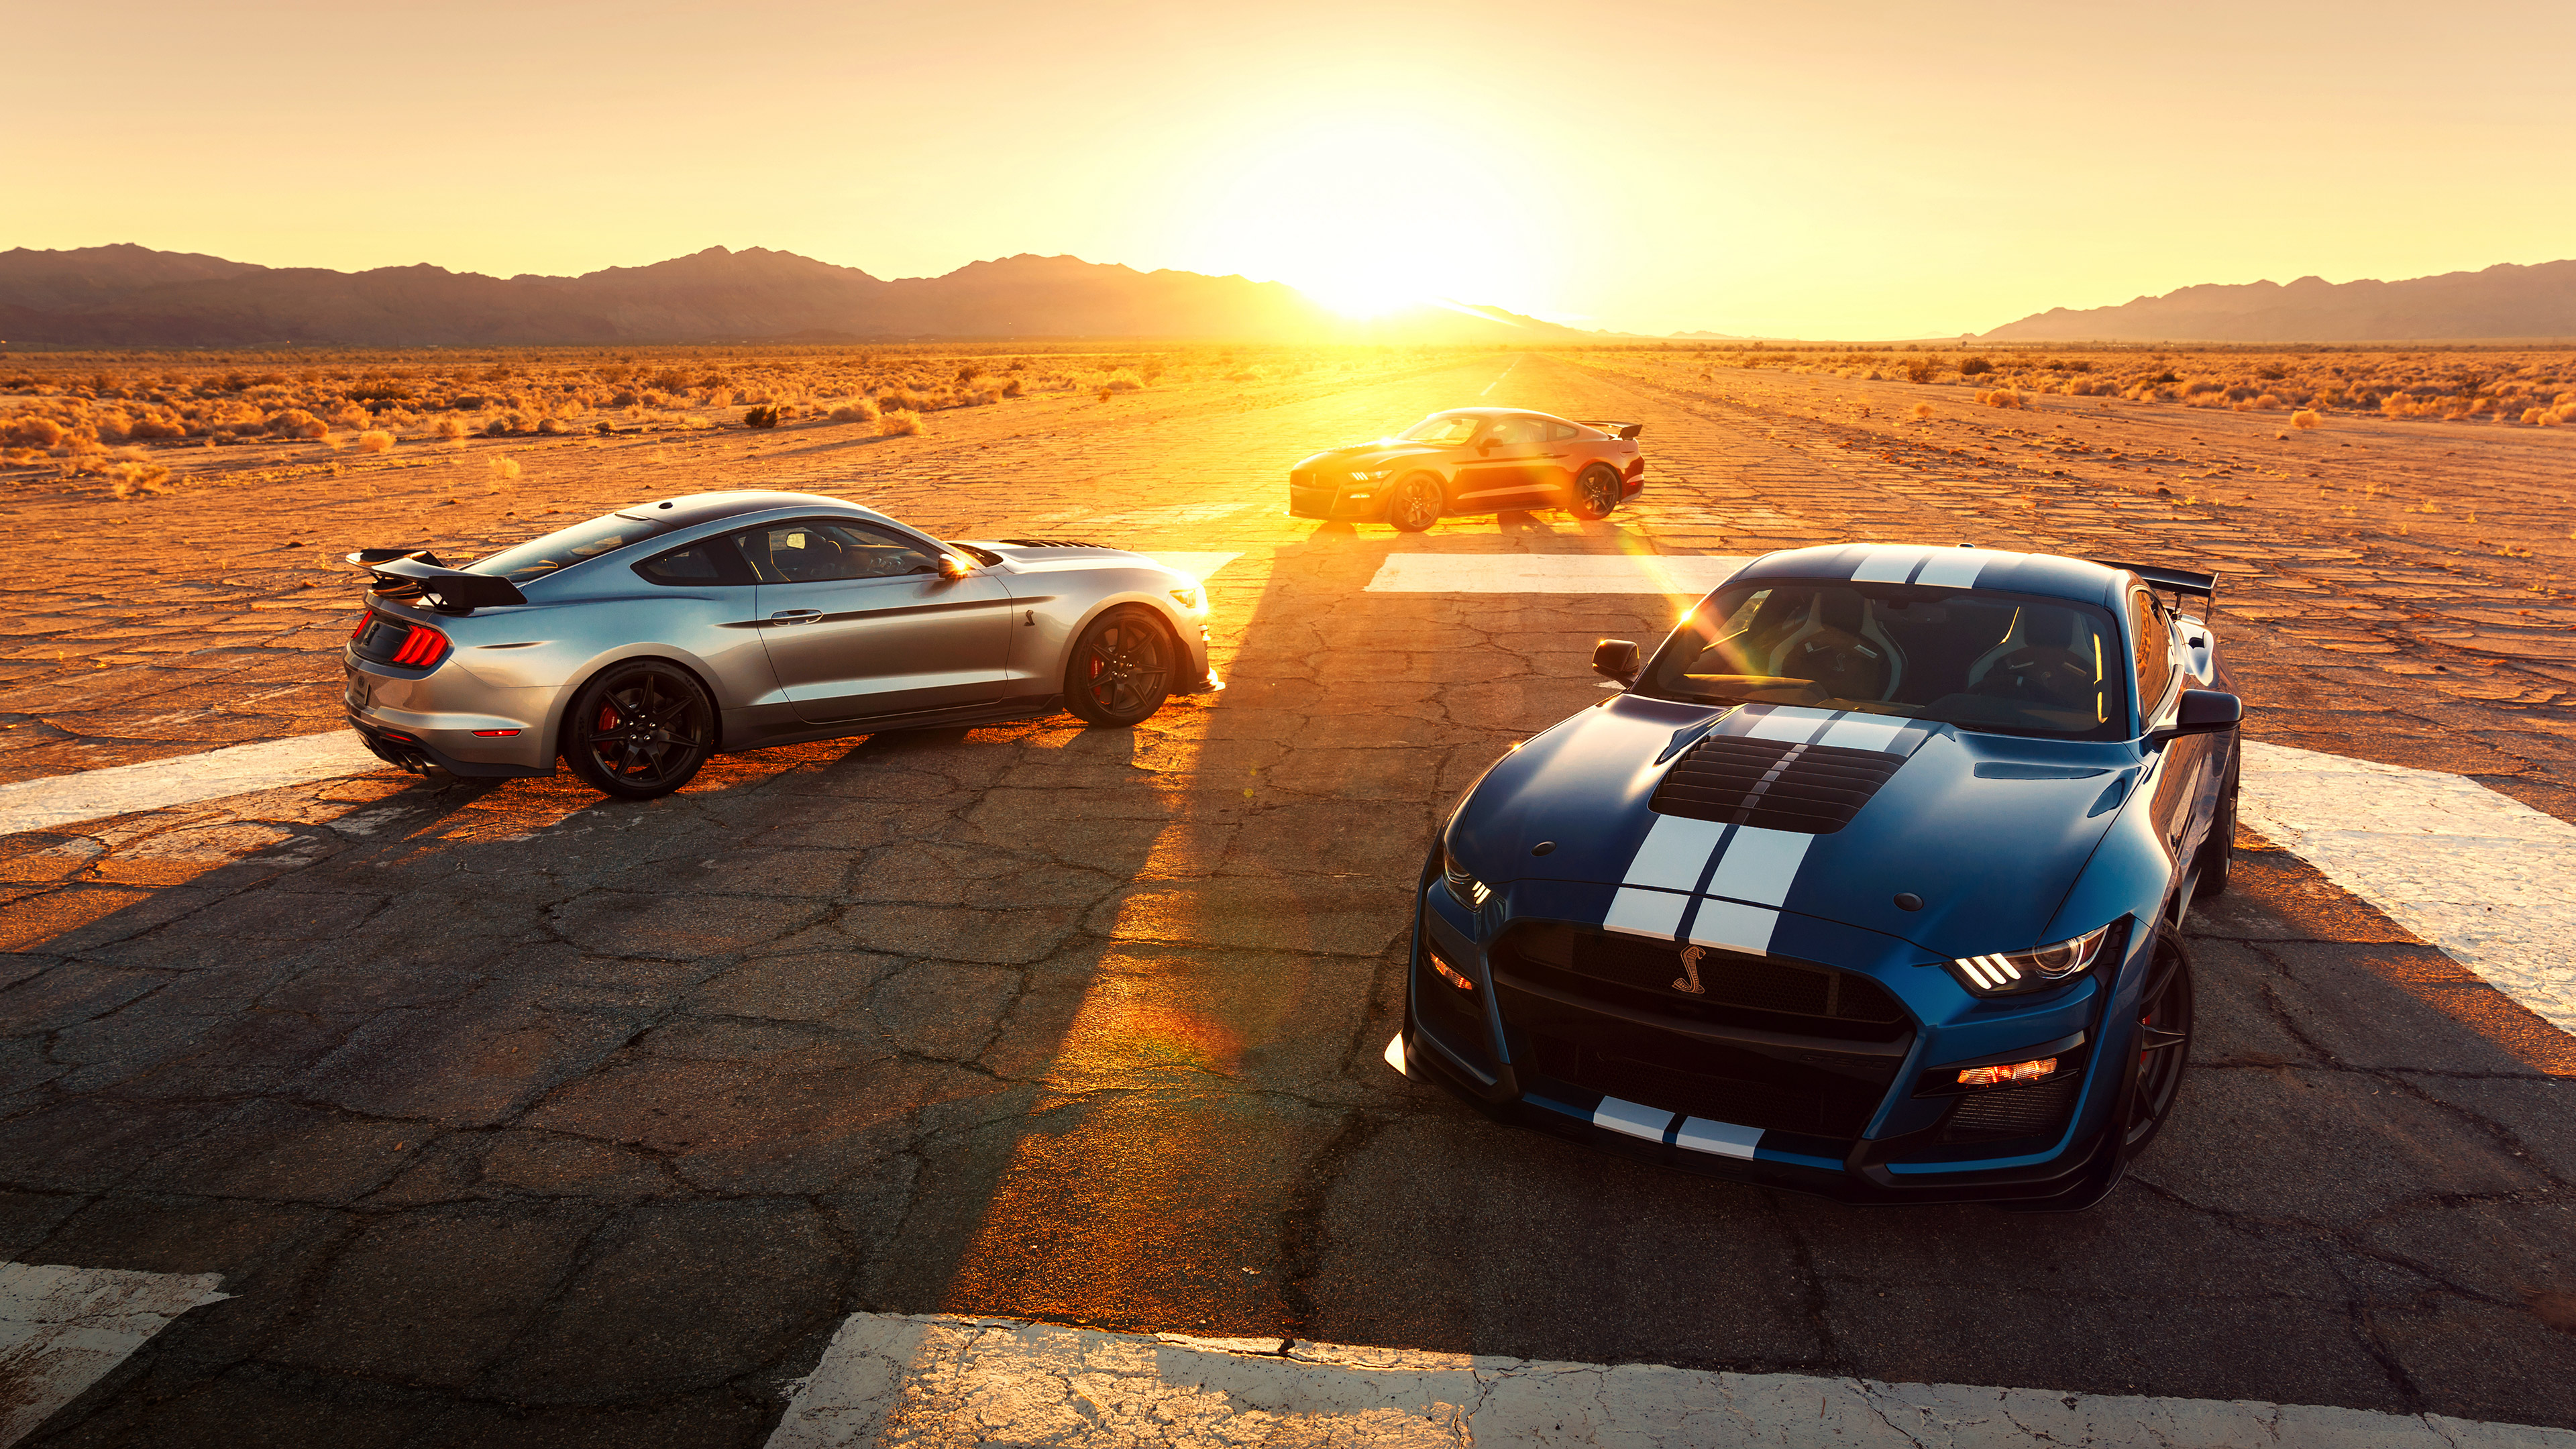 General 3840x2160 vehicle car sunset Ford Mustang Shelby Ford Ford Mustang Ford Mustang S550 muscle cars American cars racing stripes